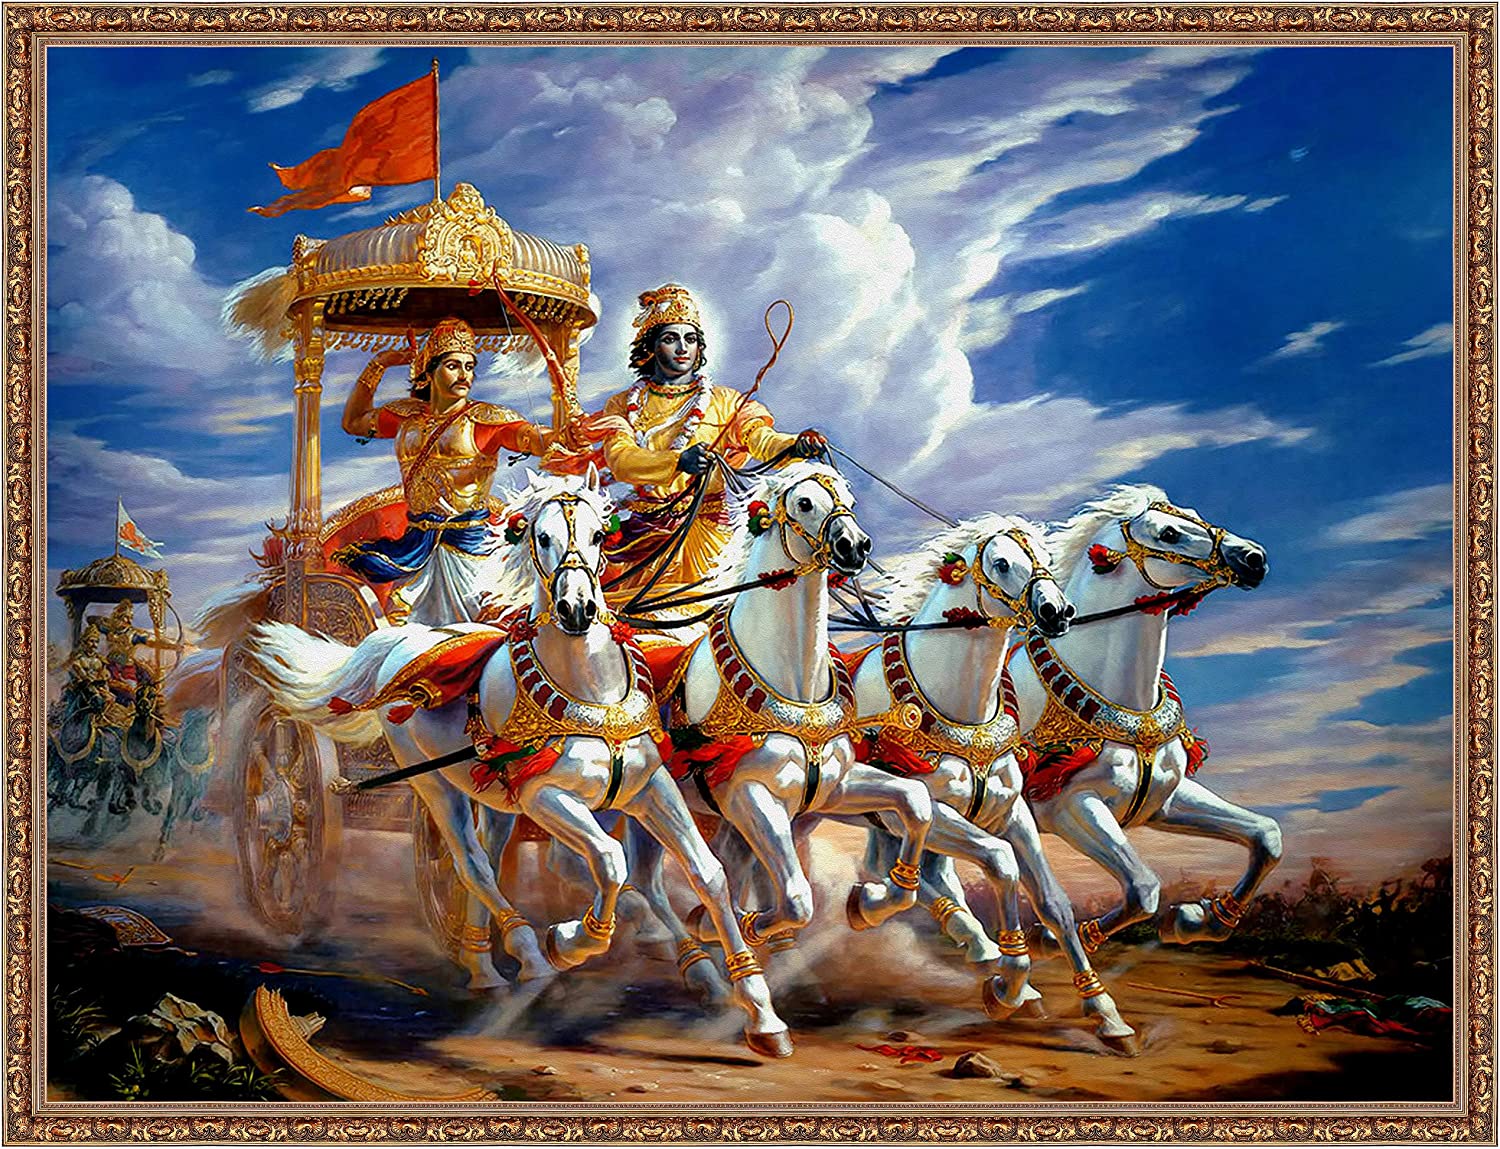 Mode Stoff Krishna Arjun HD Digitally Printed Unframed Polyester Canvas Wall Painting (20 Inch 30 Inch): Amazon.in: Home & Kitchen